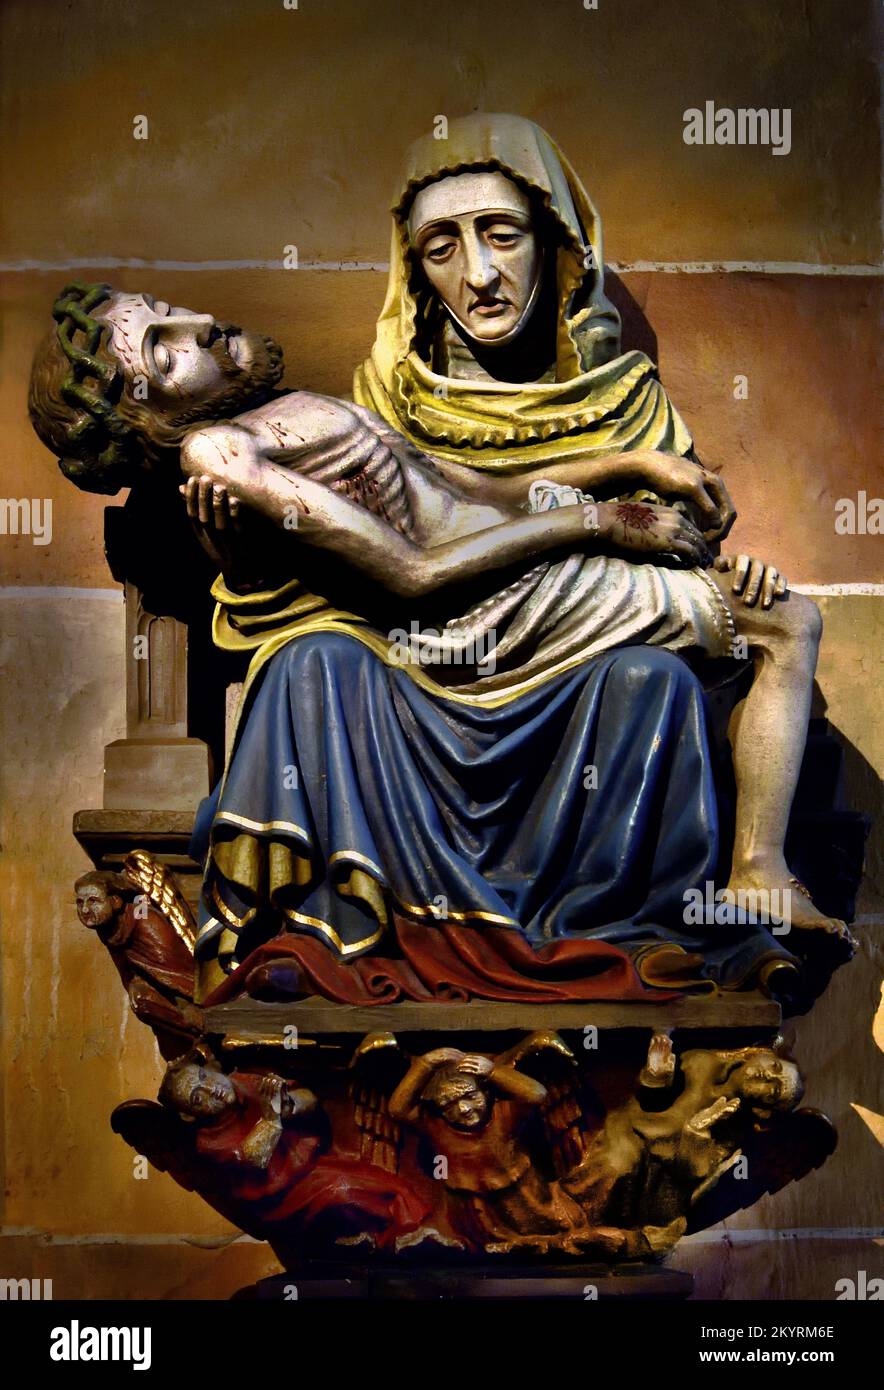 Pieta Virgin St Theobald's Church, Thann The building was erected between 1332 - 1516 Haut-Rhin Alsace Franch French Stock Photo